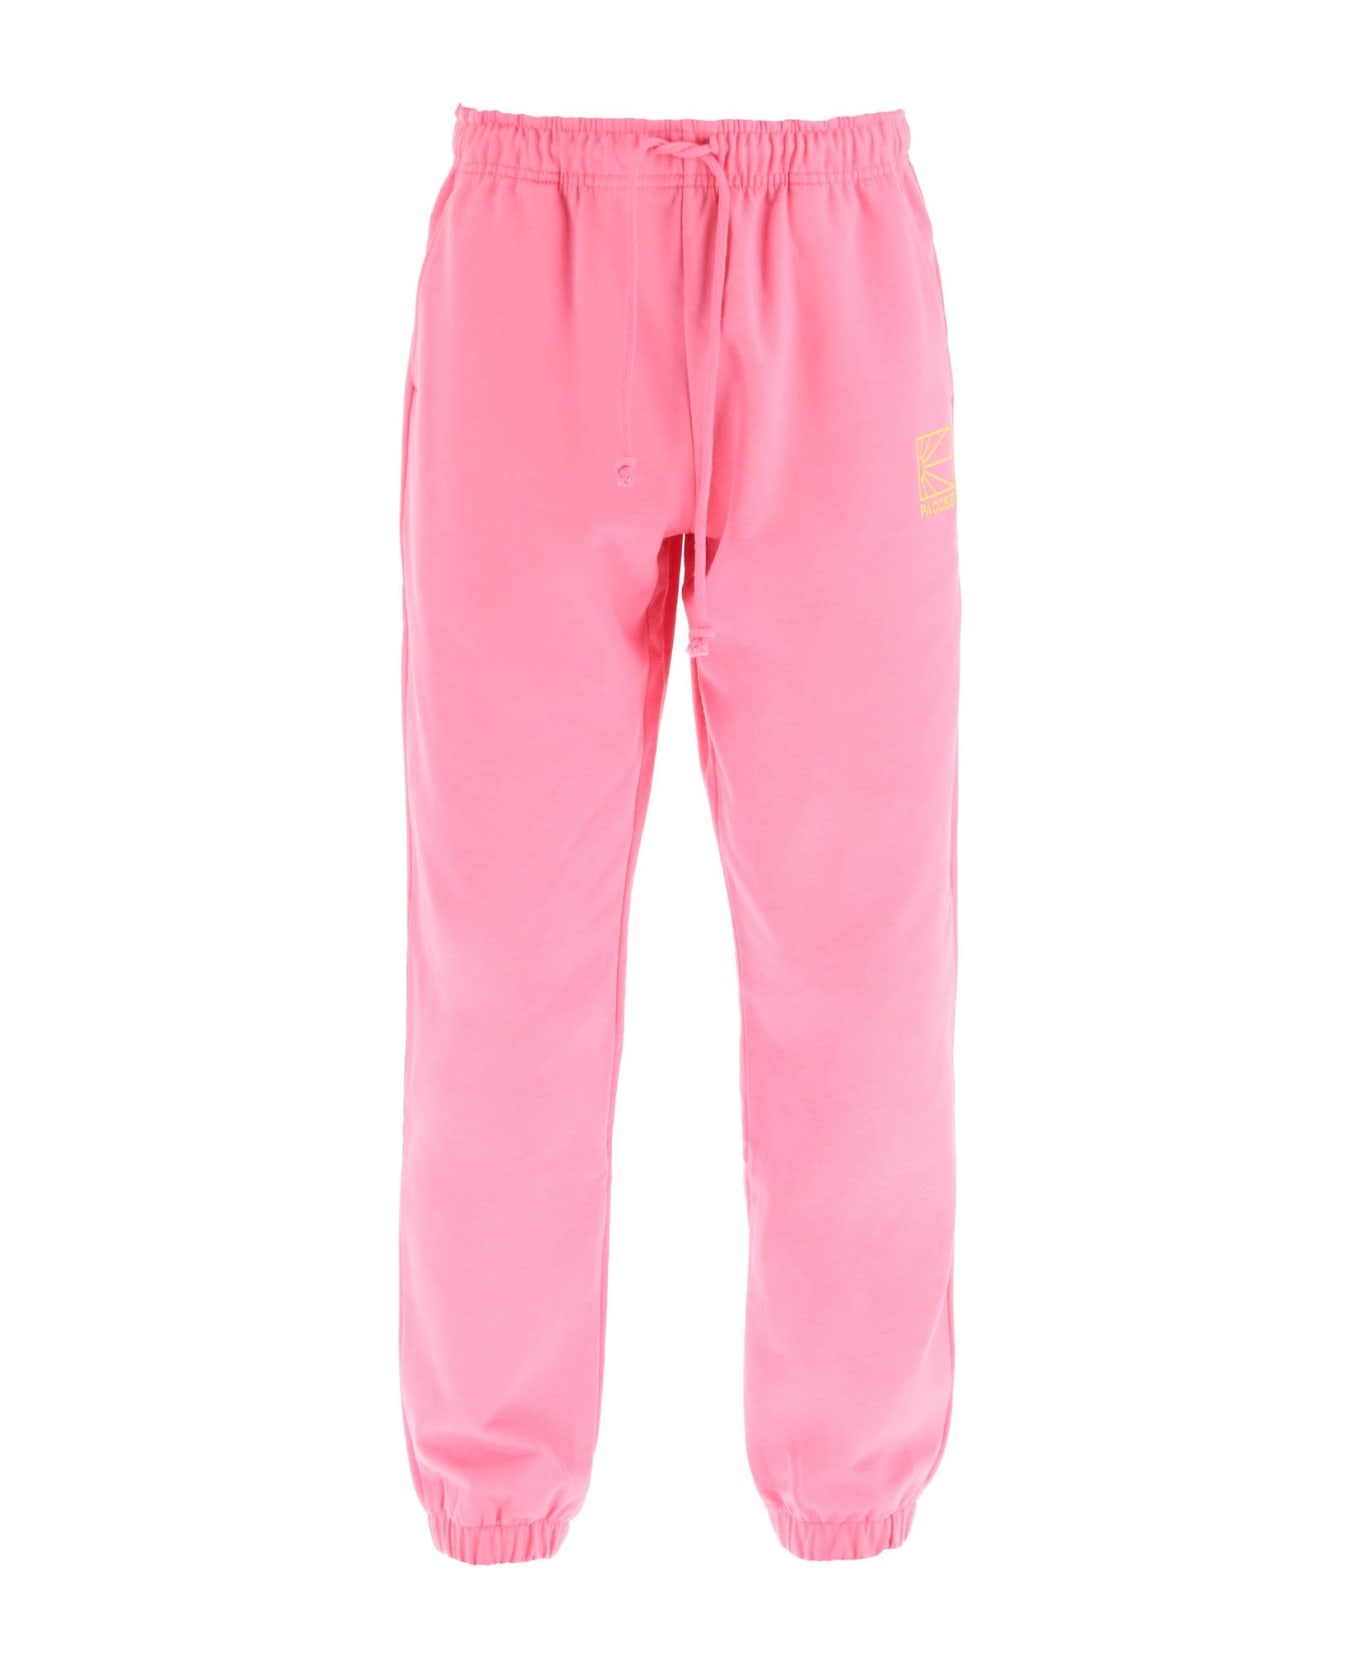 PACCBET Logo Embroidery Jogger Pants - PINK 4 (Pink)